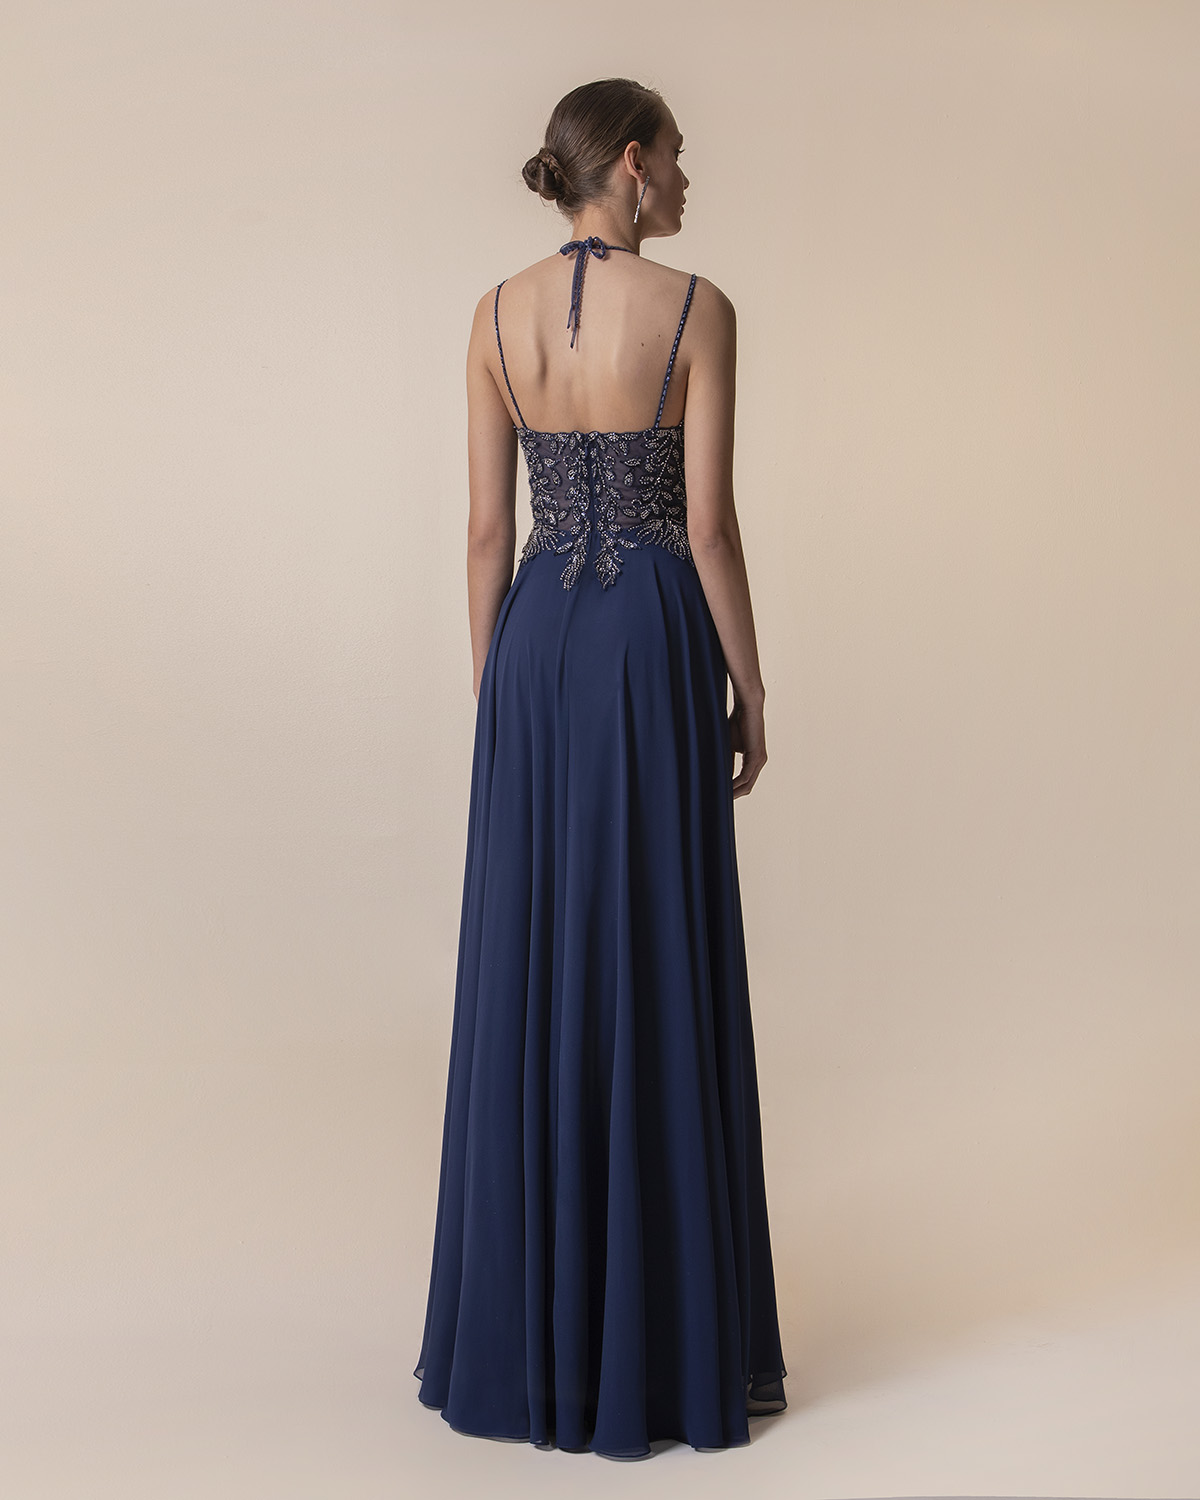 Evening Dresses / Long chiffon evening dress with fully beaded top